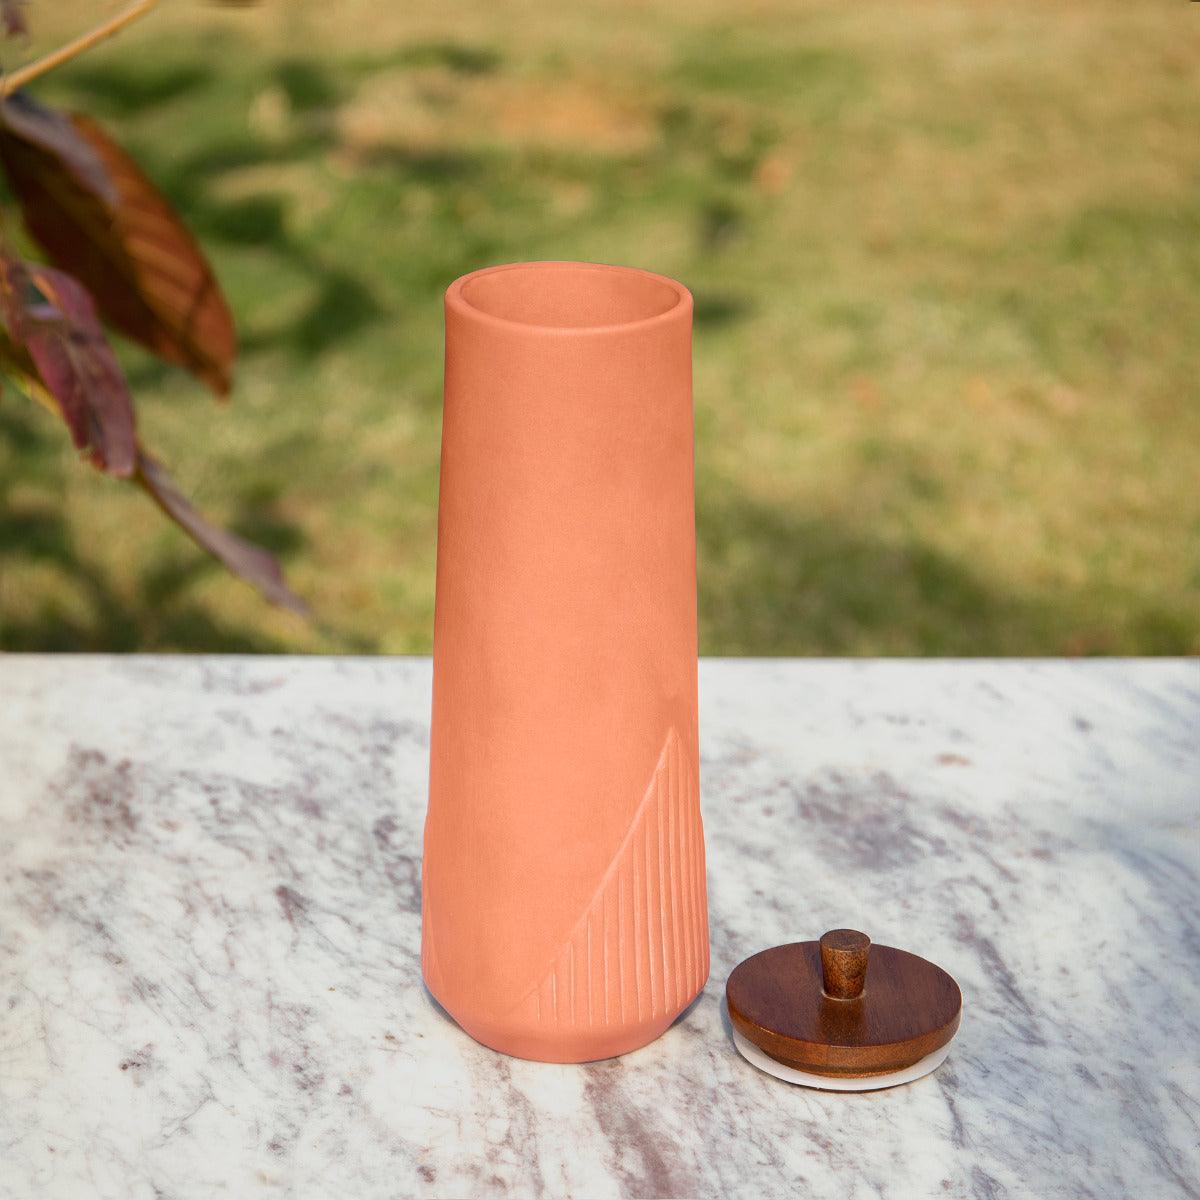 Sienna Terracotta Carafe With Lid